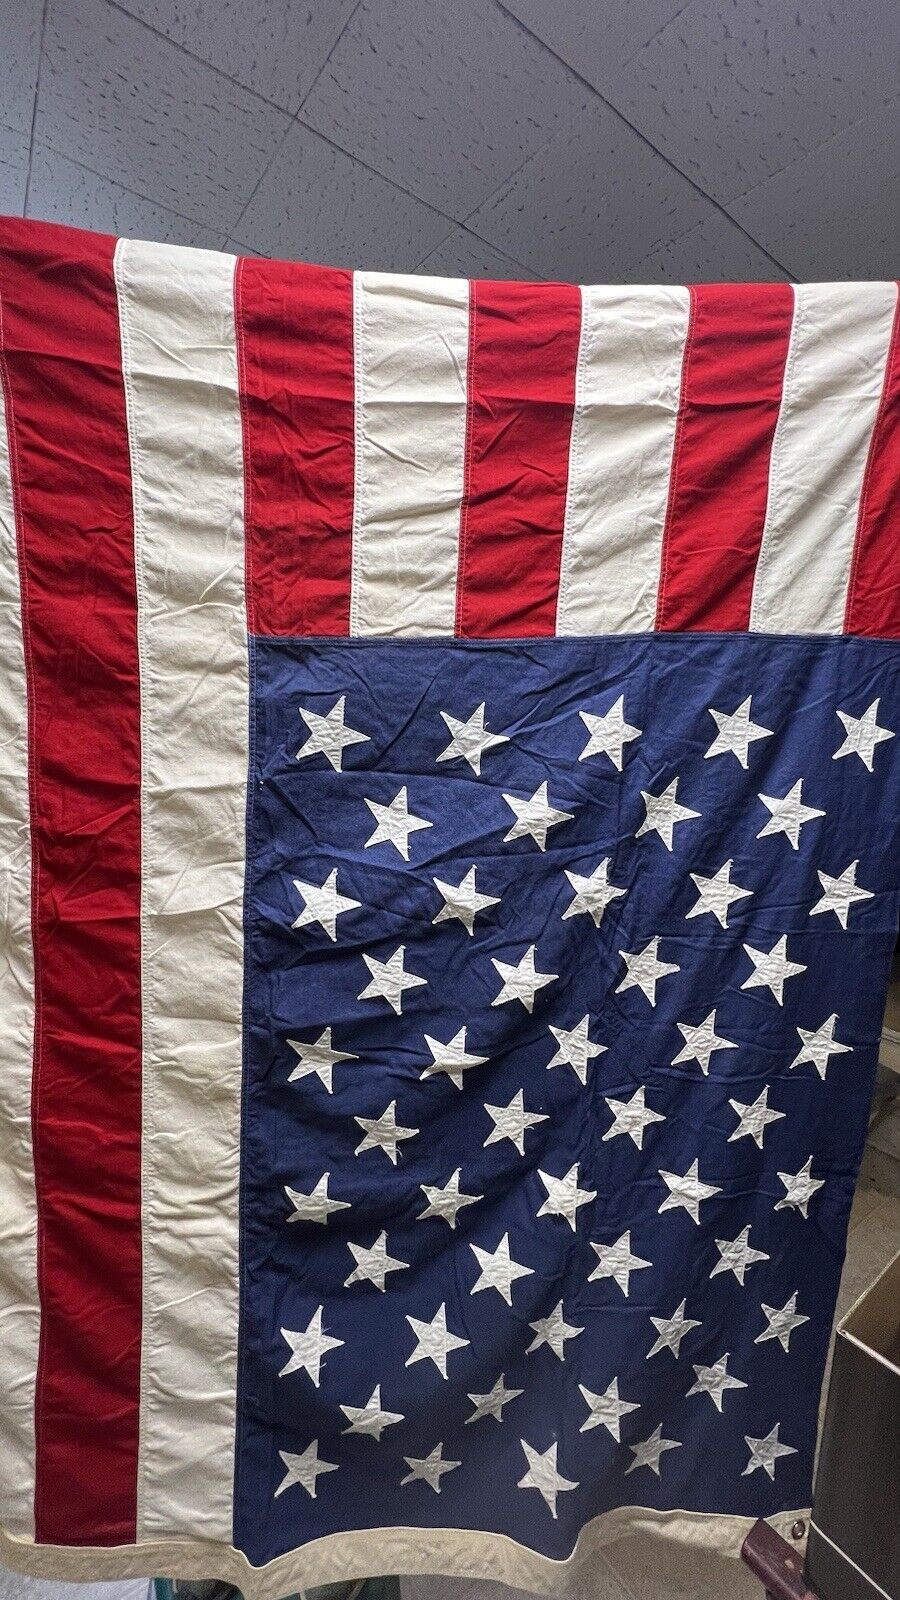 Vintage LARGE 50 Star Flag Stars Stripes Cloth Valley Forge 5\' x 9\' 2 Ply